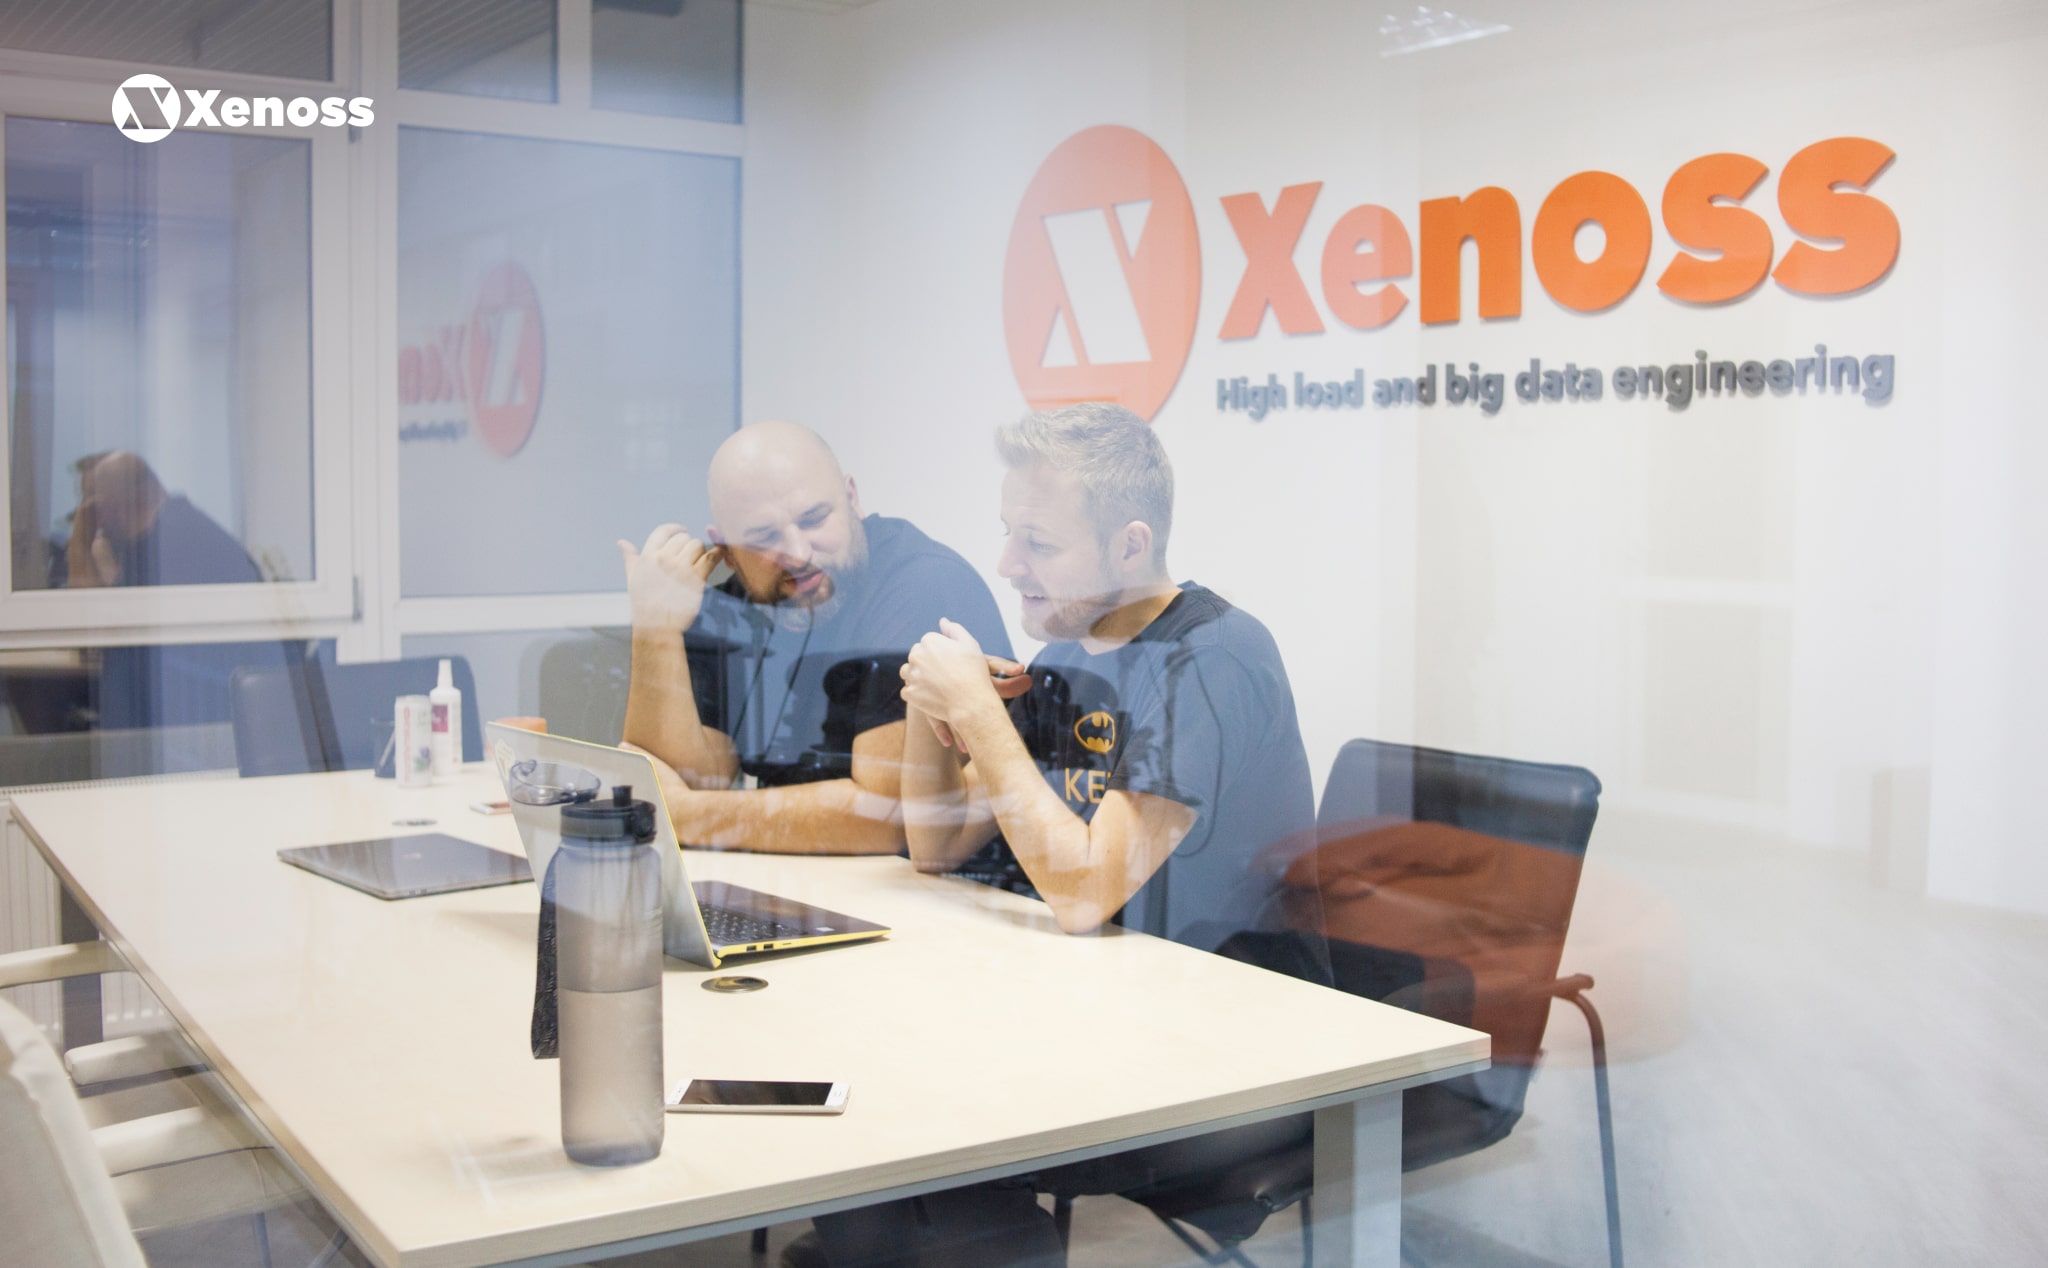 Xenoss office for Software Architecture fwdays 2021